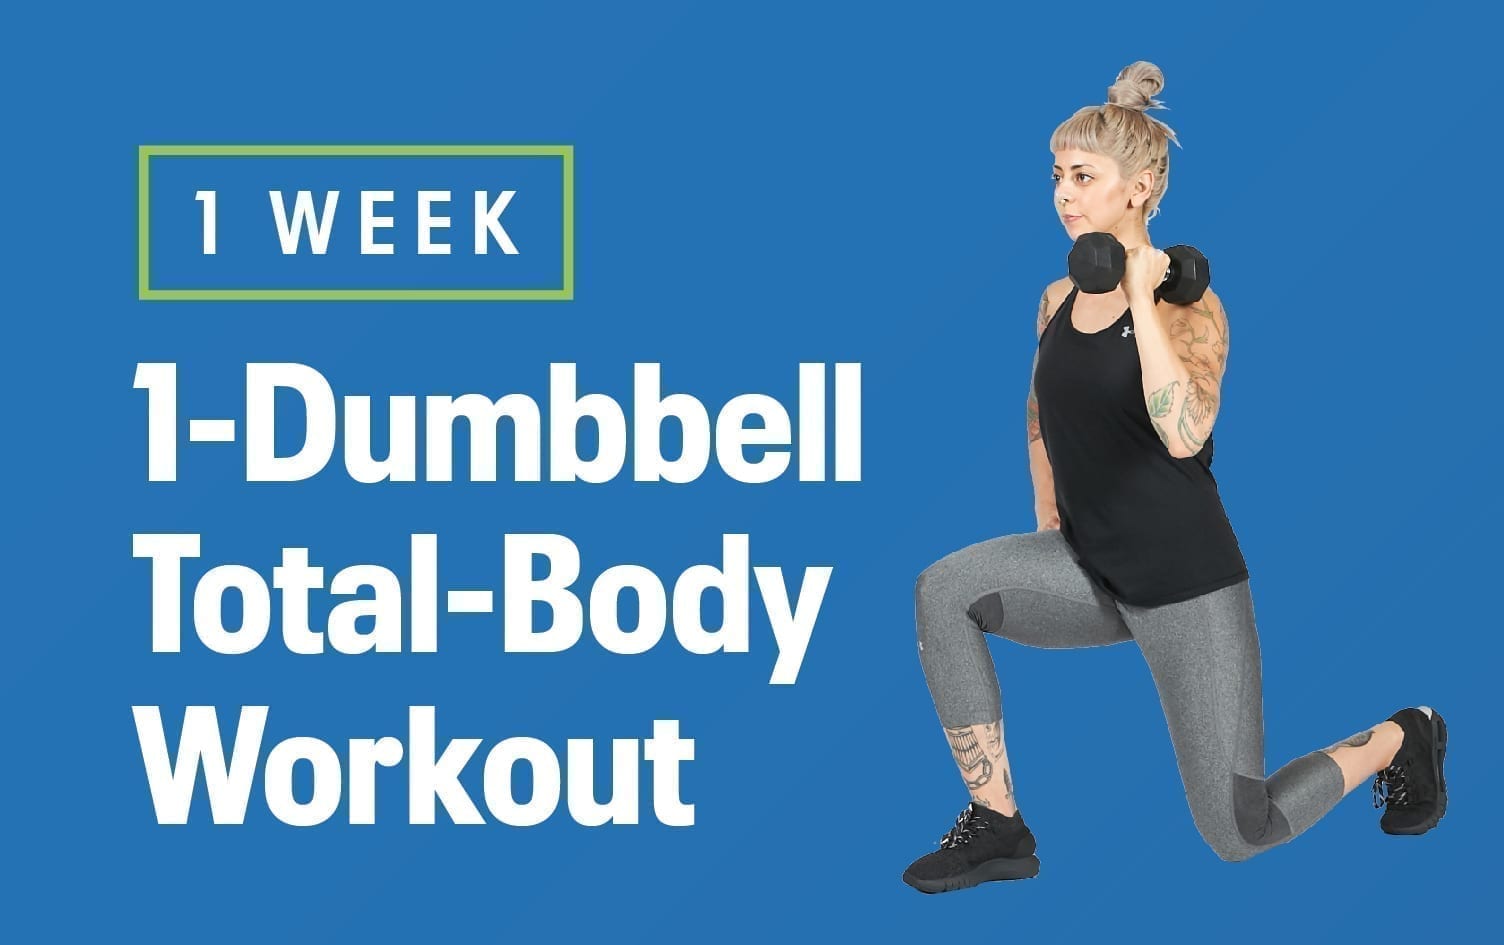 1-Week, 1-Dumbbell Total-Body Workout